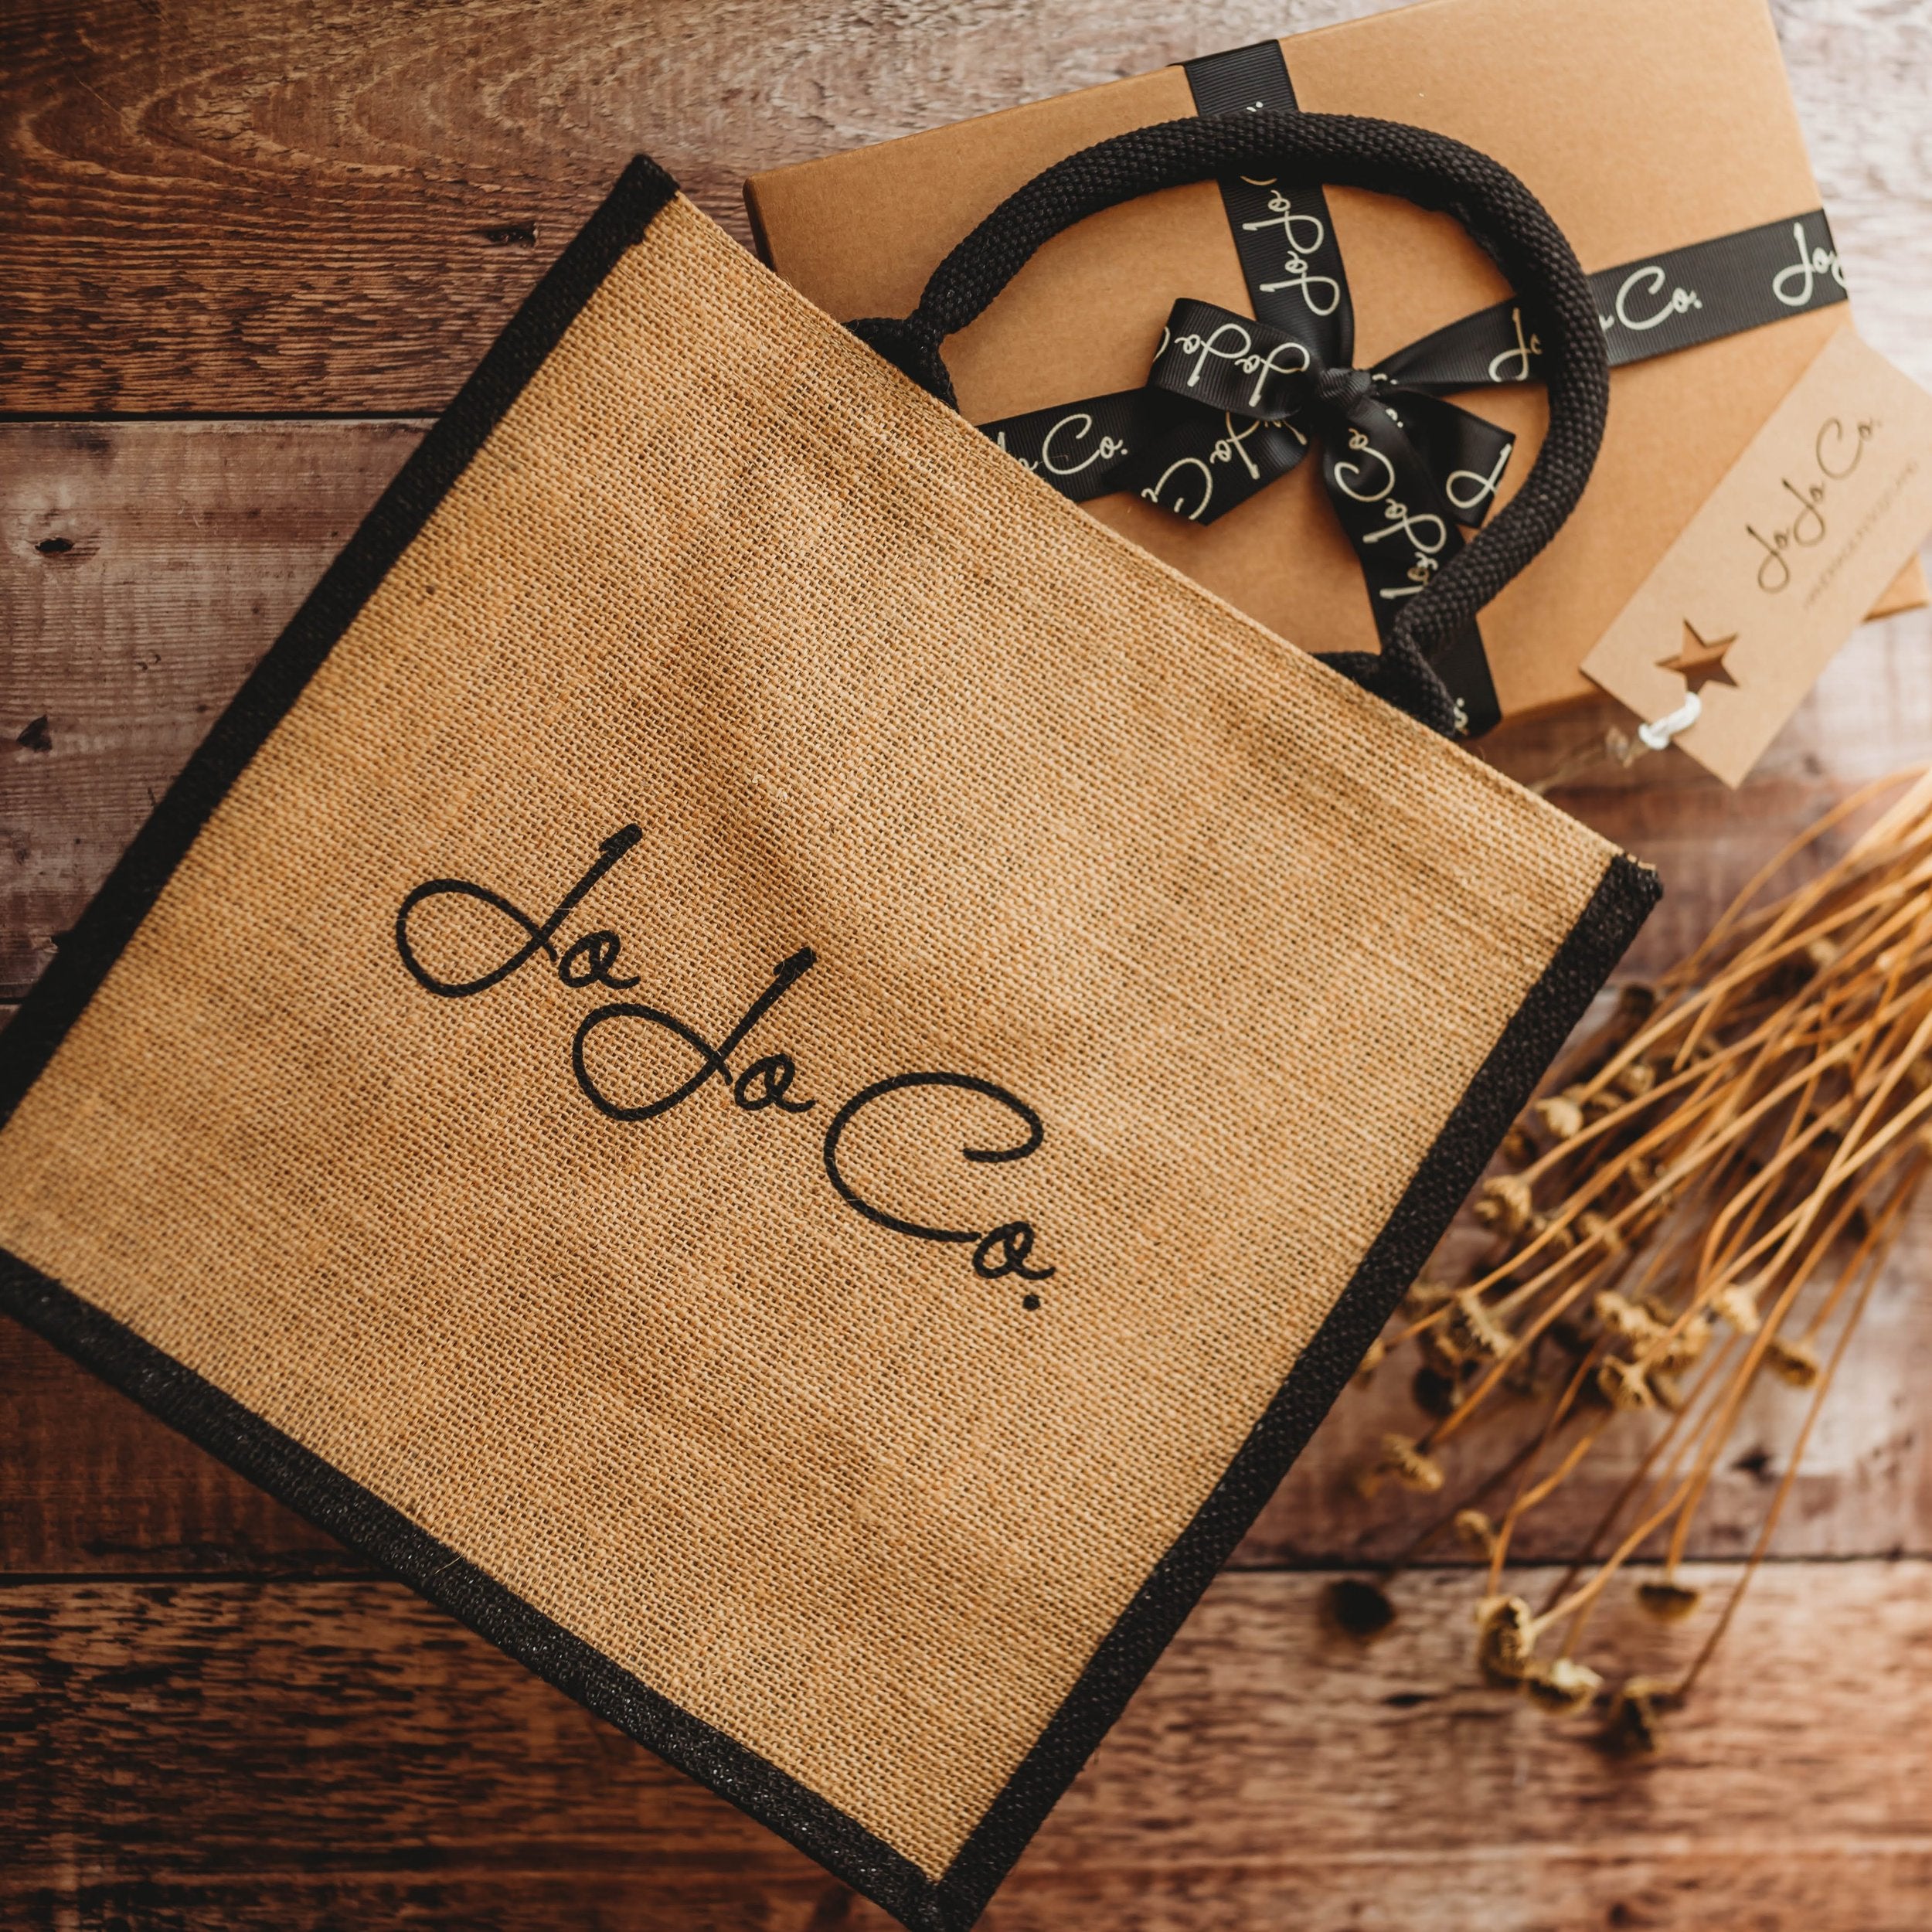 A natural coloured jute bag with black JoJo Co. logo and black trimming sits on top of a cardboard gift box with black branded bow. 